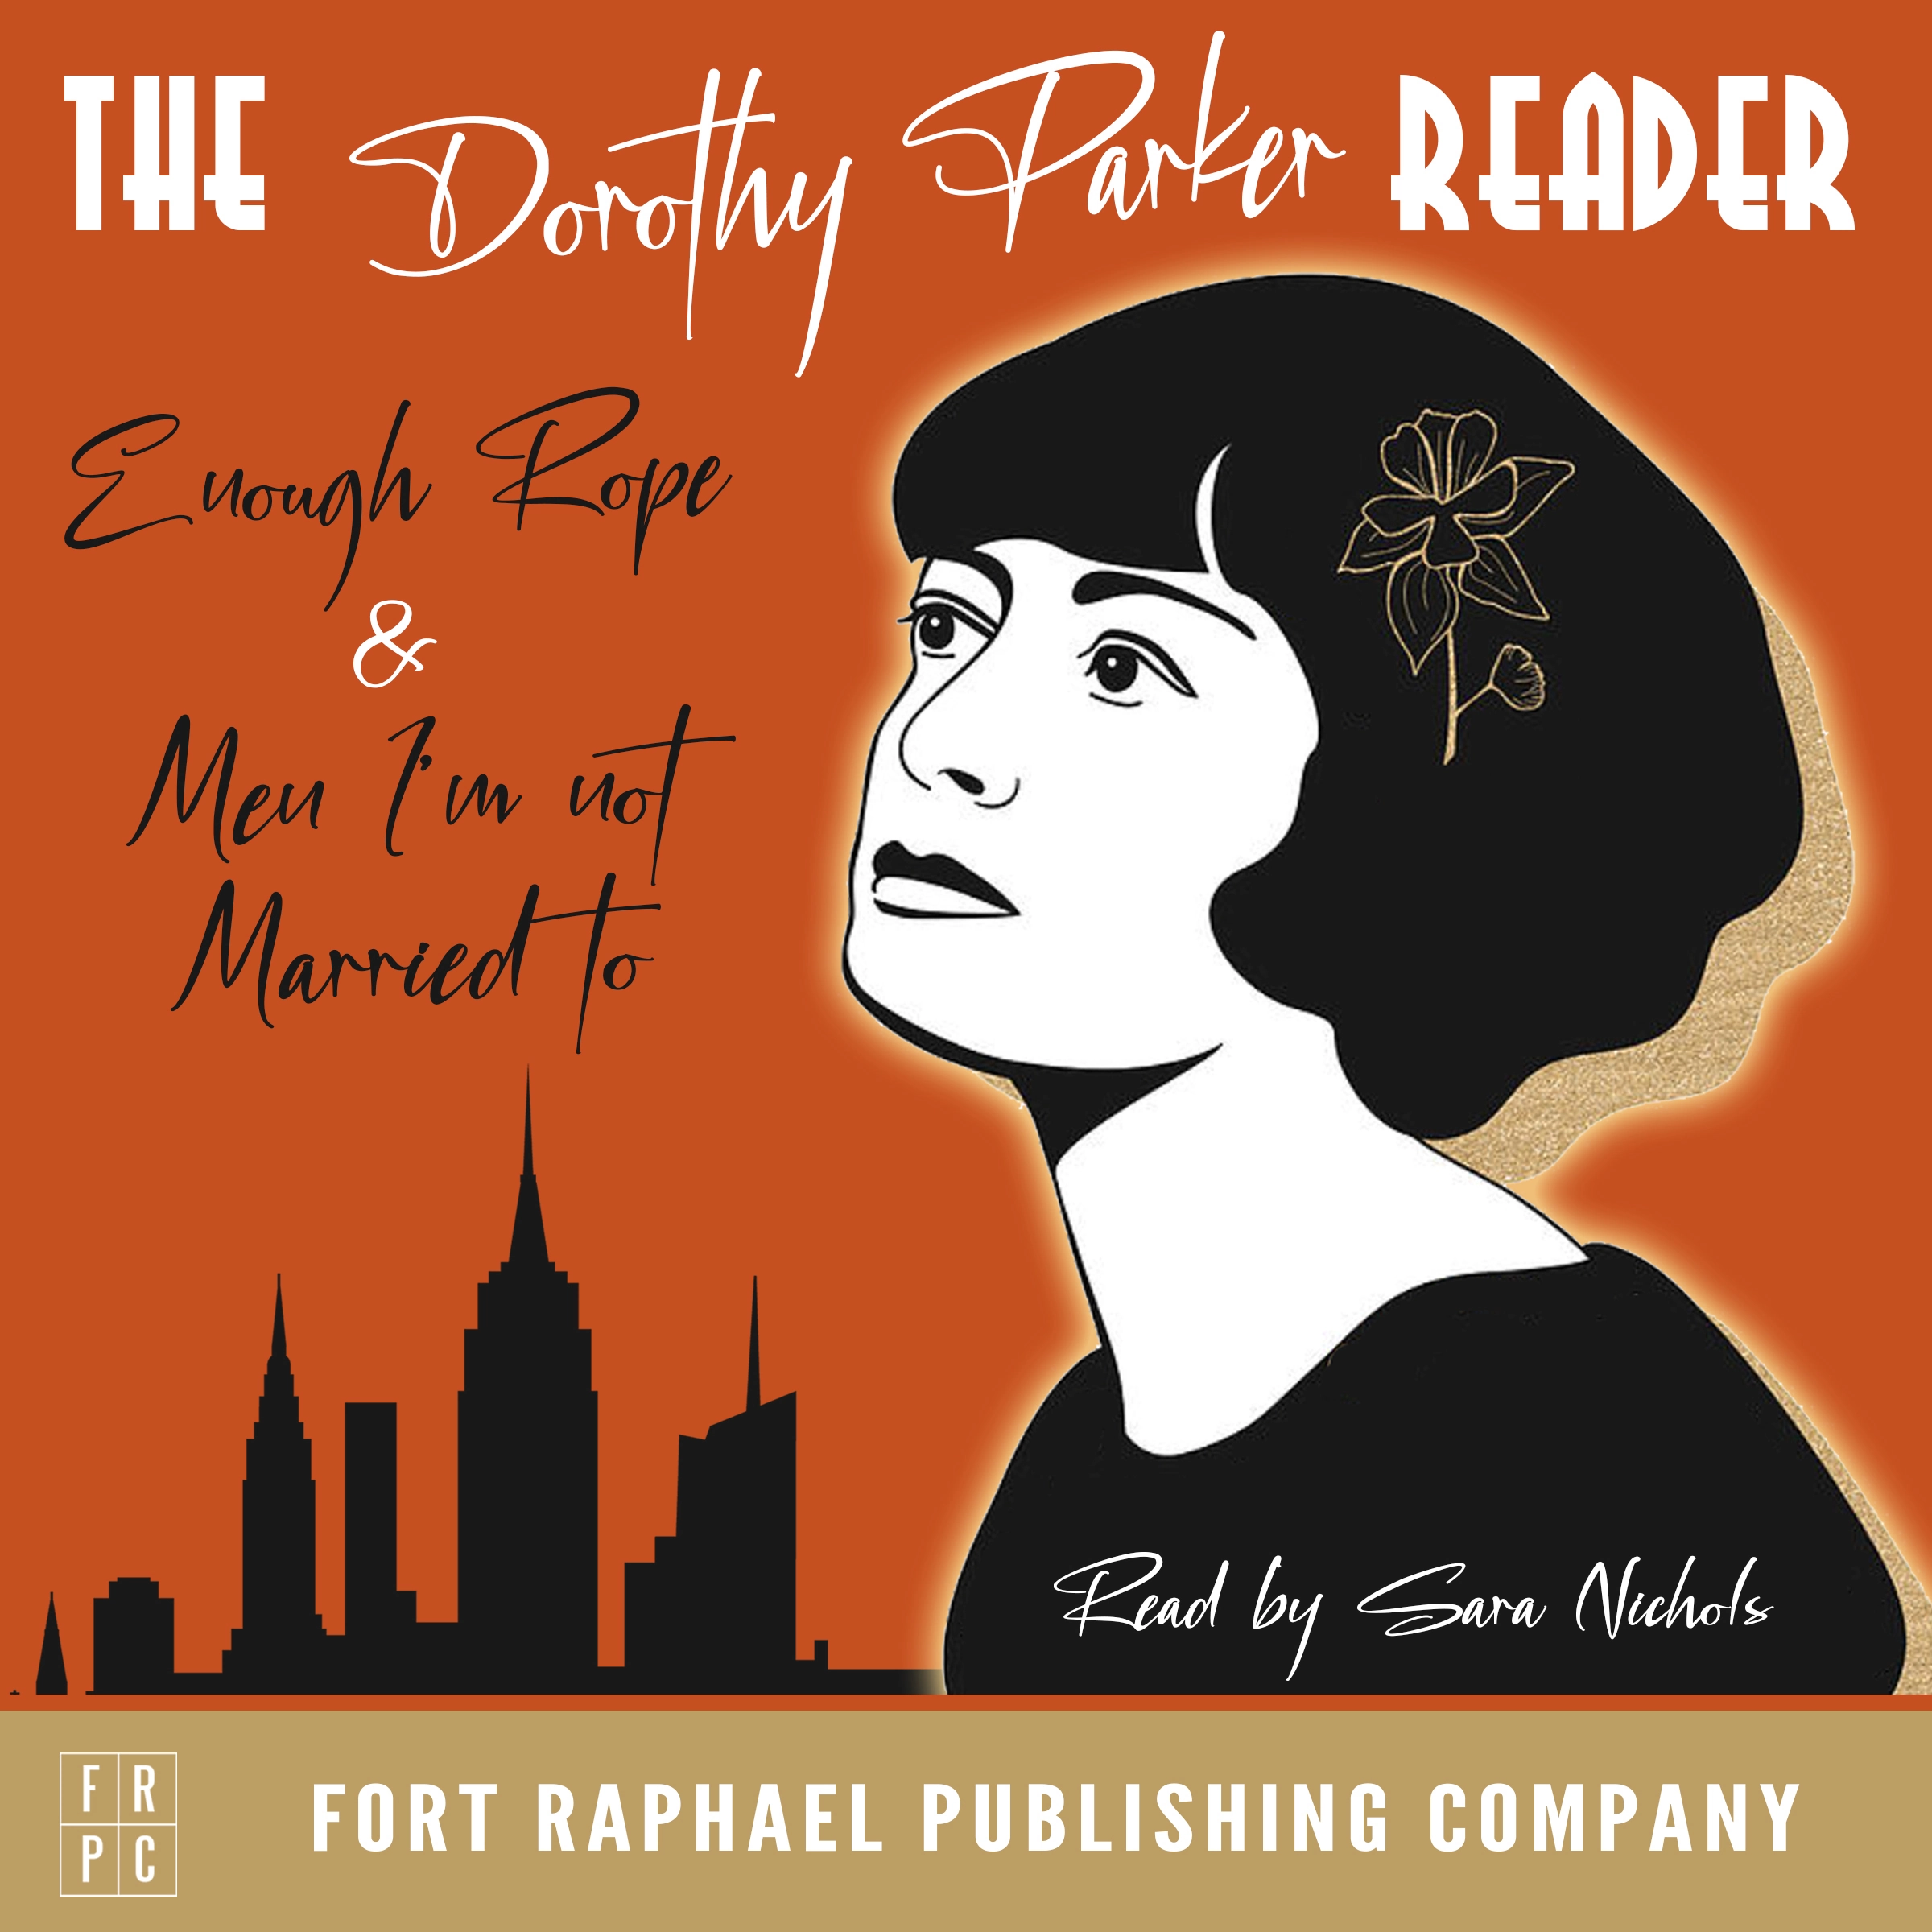 The Dorothy Parker Reader - Enough Rope, Men I'm Not Married To and Sunset Gun - Unabridged by Dorothy Parker Audiobook